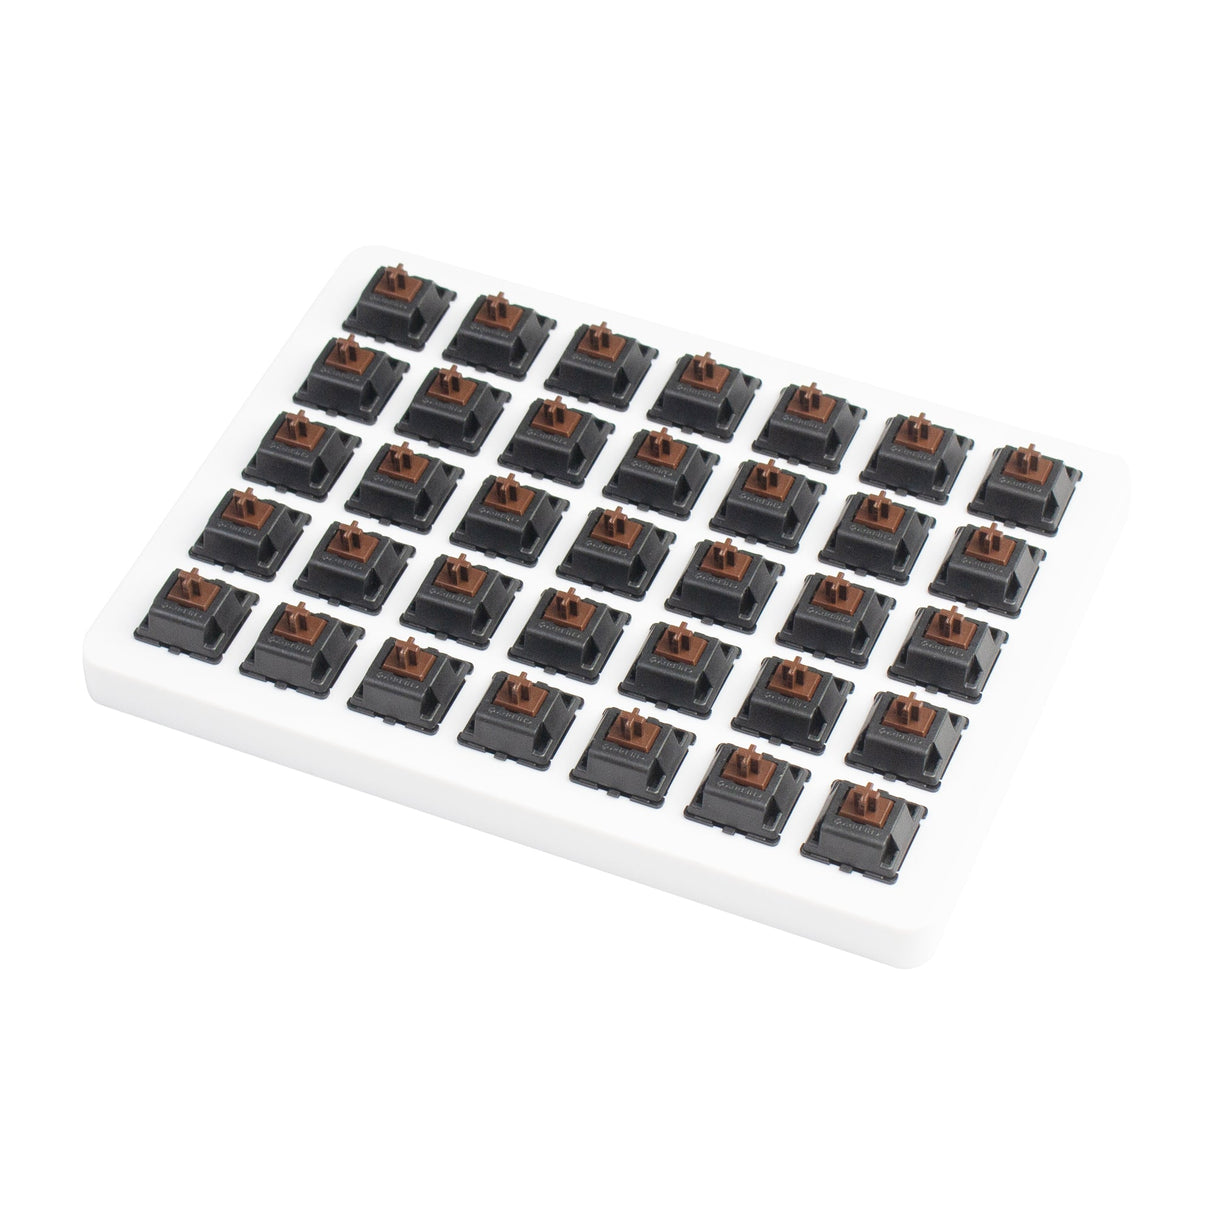 Cherry Brown Switches